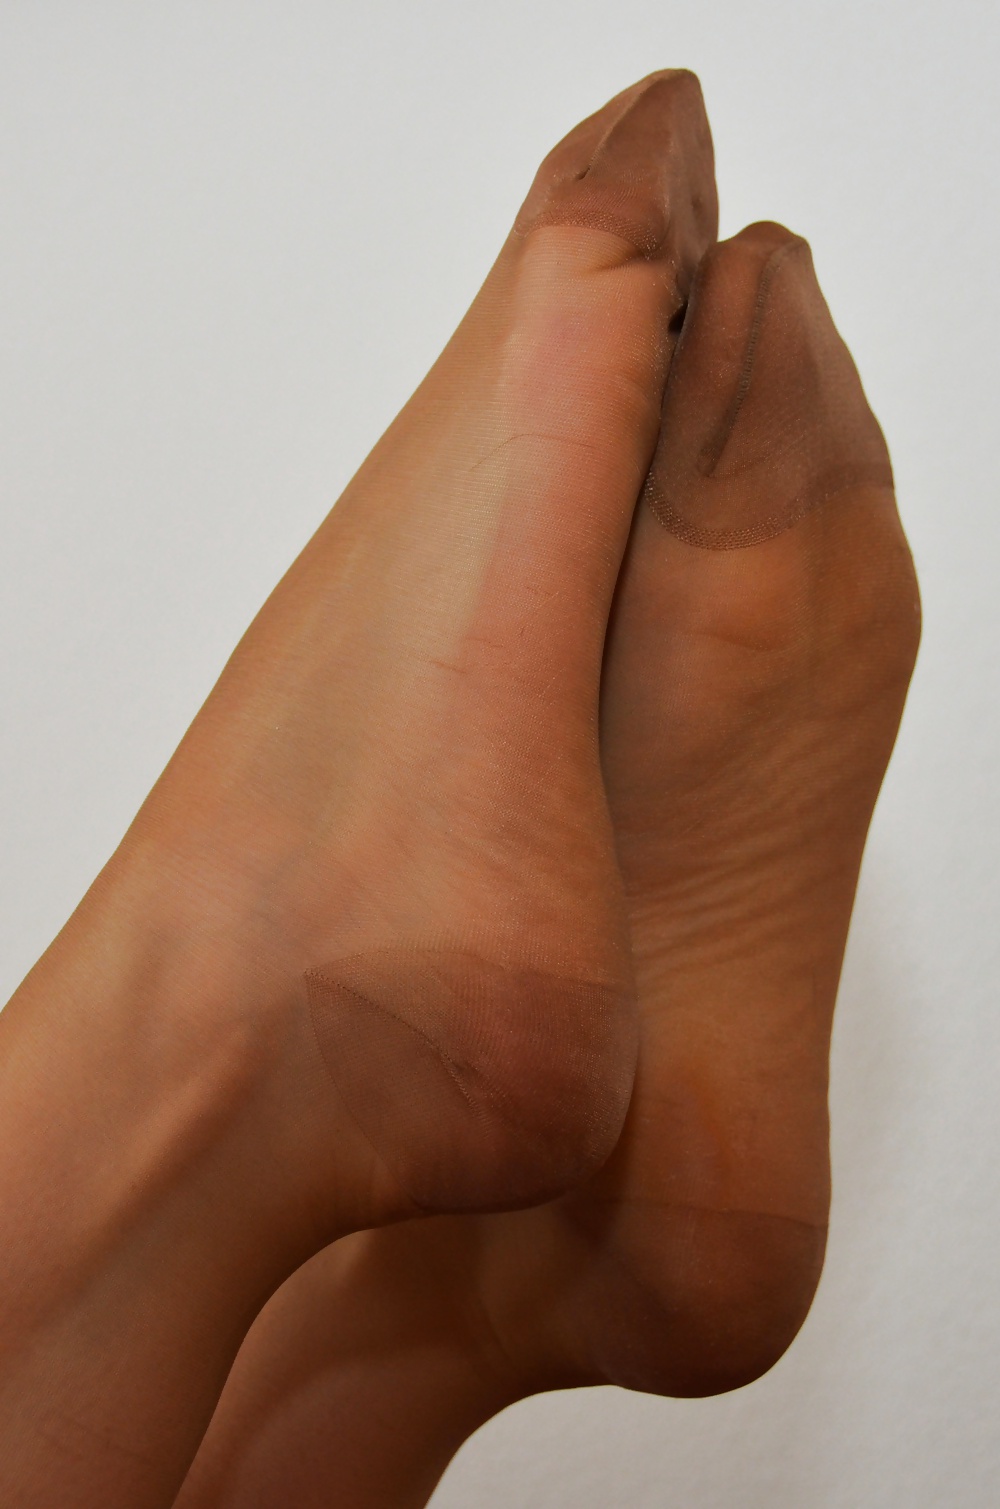 Wife's feet in Nylons - Samples 1 #26220424